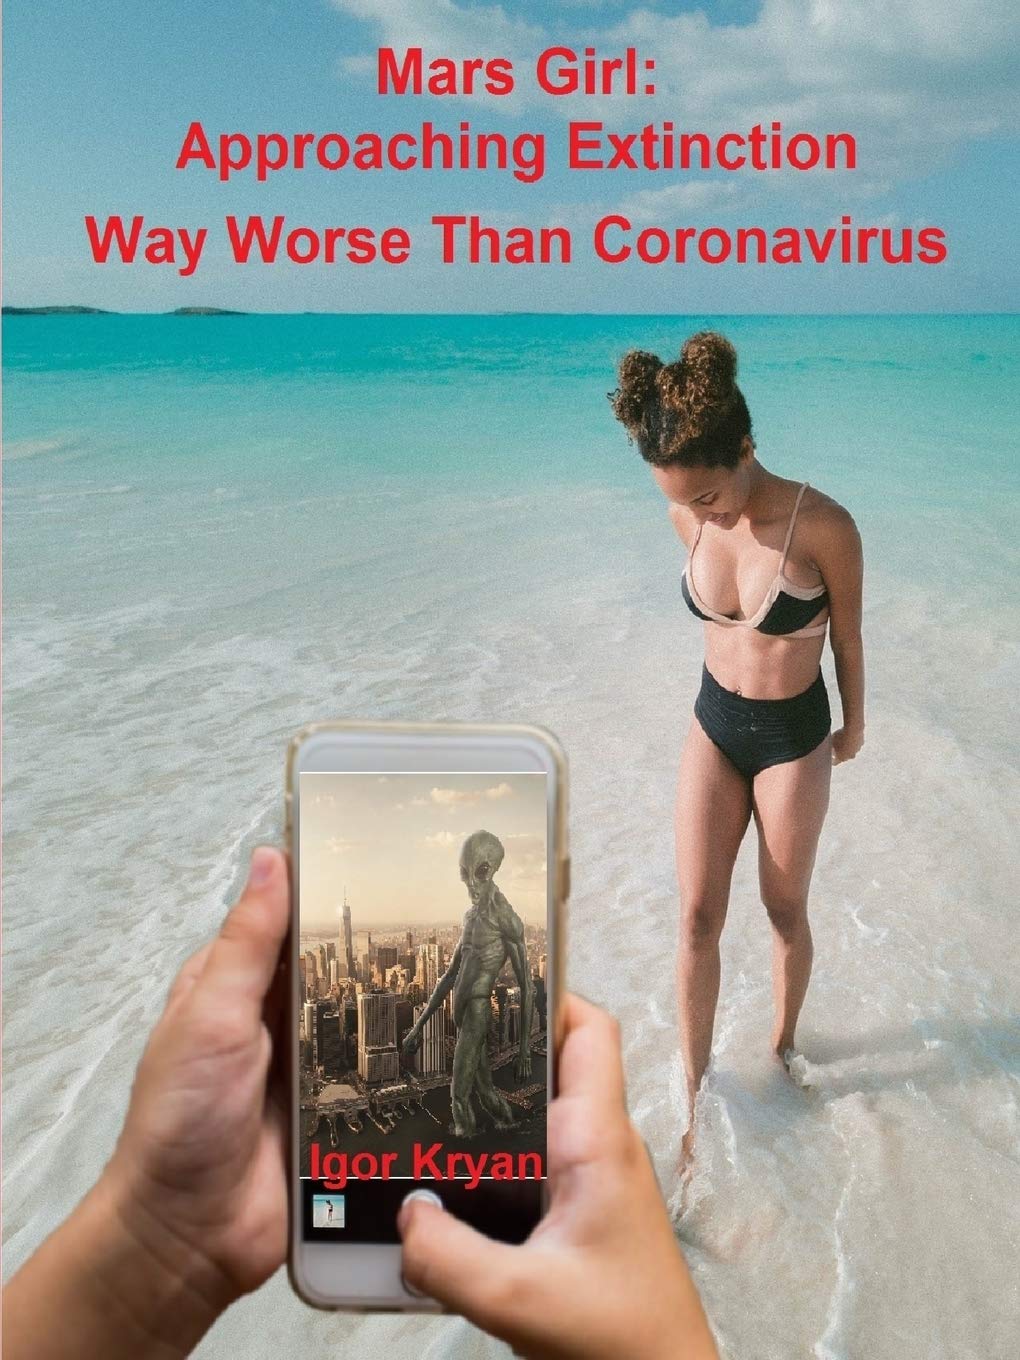 Mars Girl: Approaching Extinction Way Worse Than Coronavirus, by Igor Kryan - Survival (and Other) Books About the COVID-19 Coronavirus - Survival Books - Survival, Sustainable Living